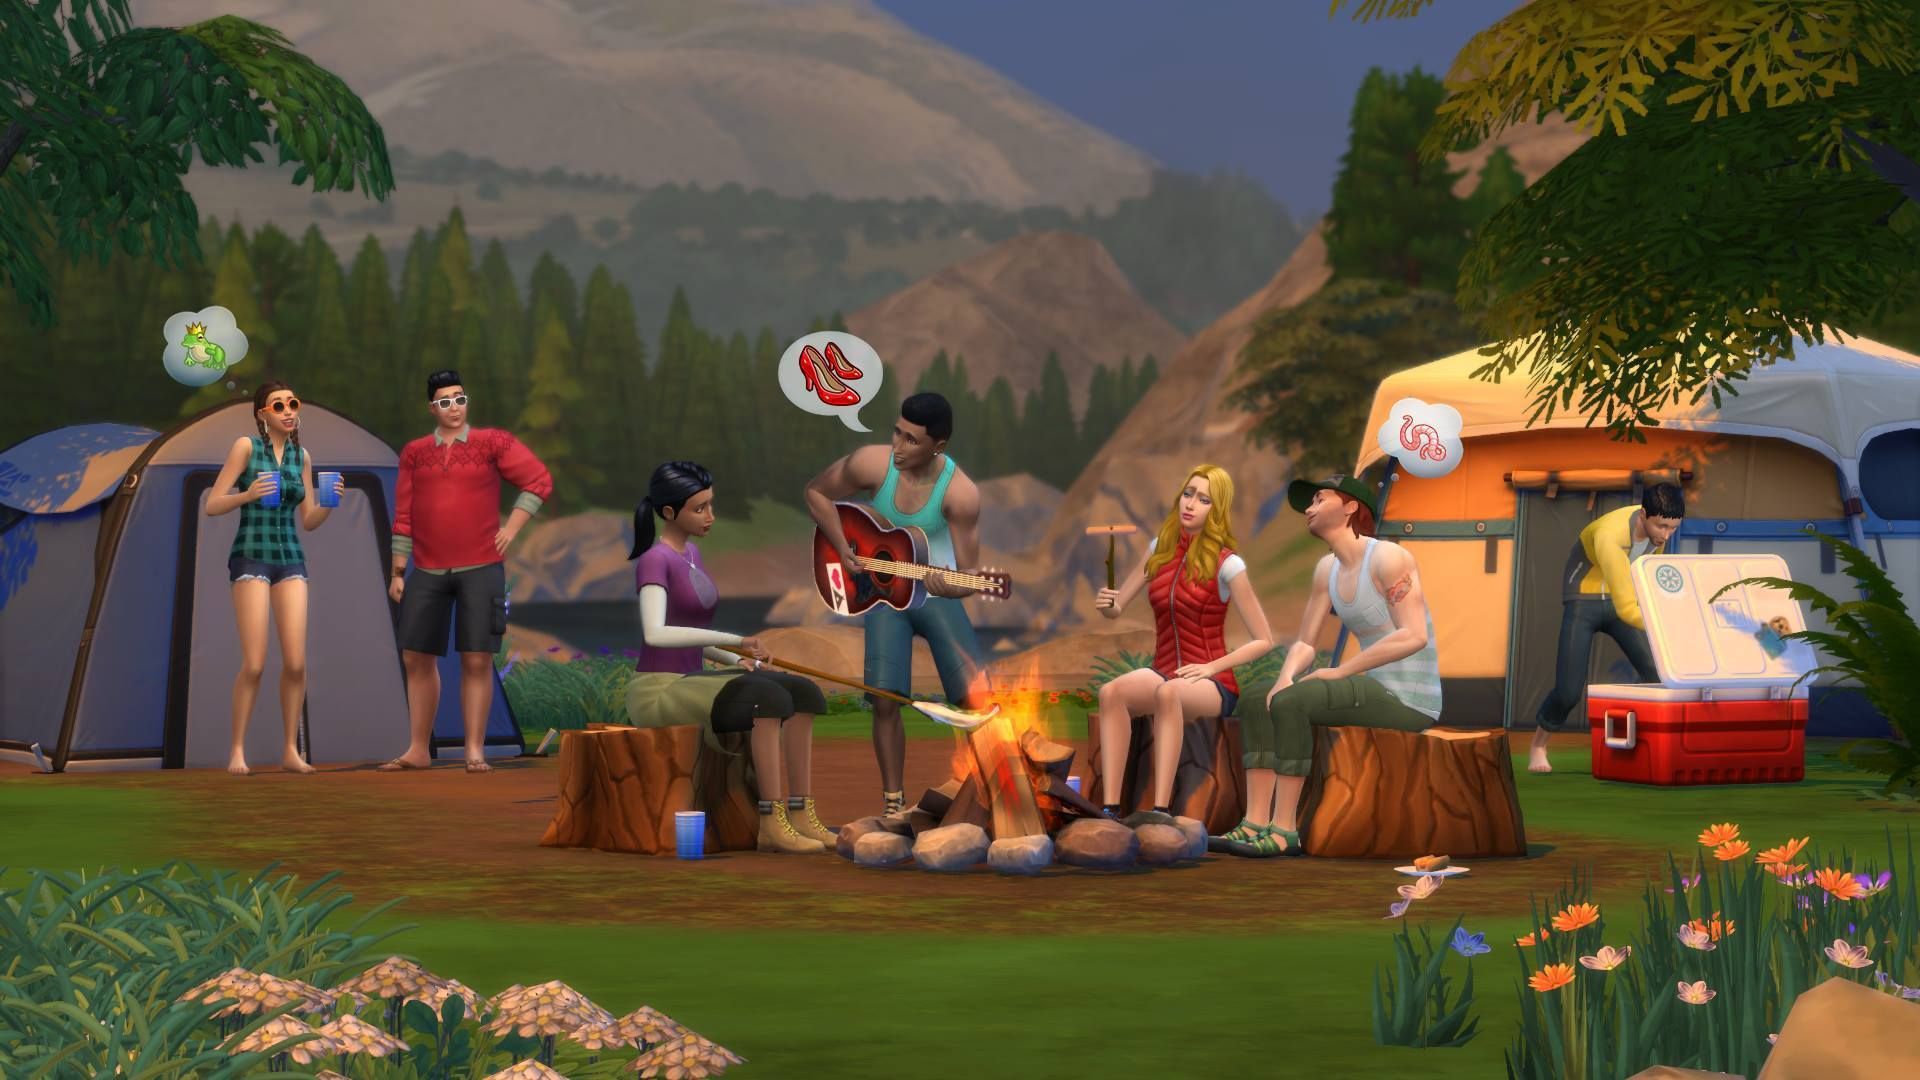 Sims gathering around a campfire